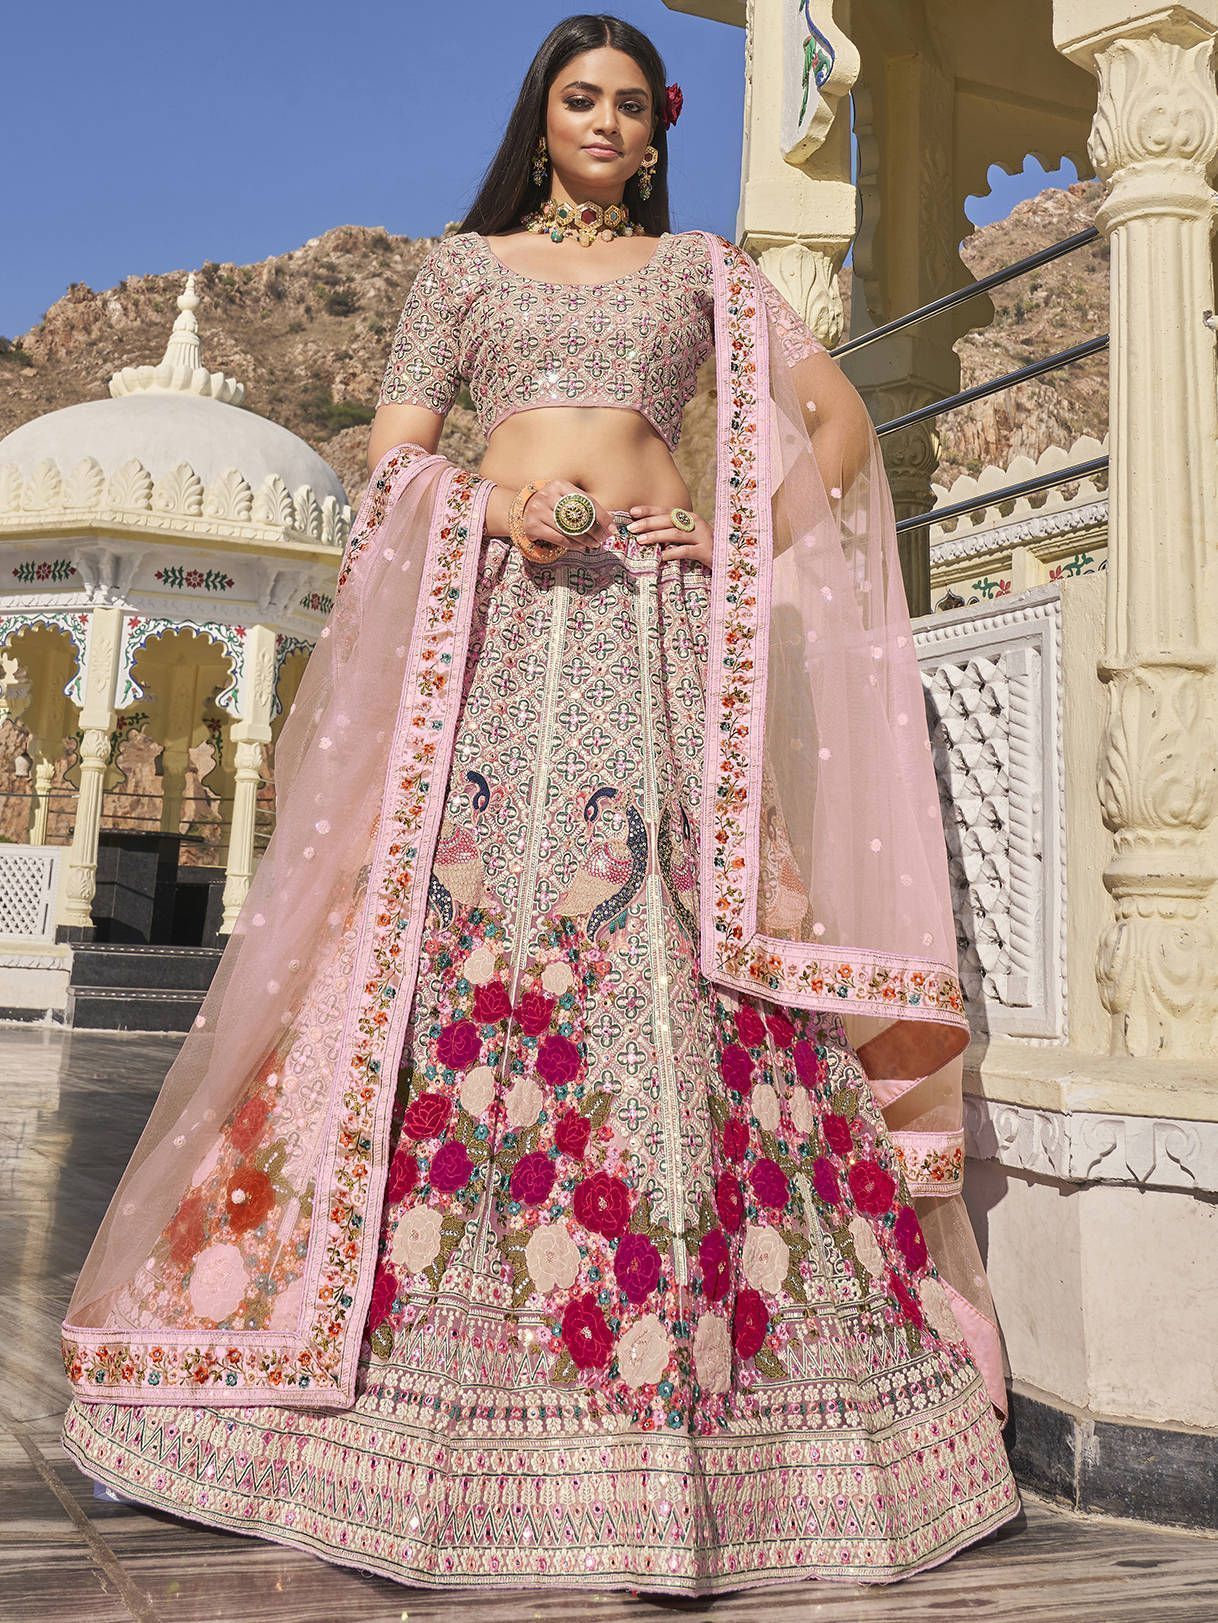 Discover Top Reviews & Brands In India For Lehengas & Gowns On LBB